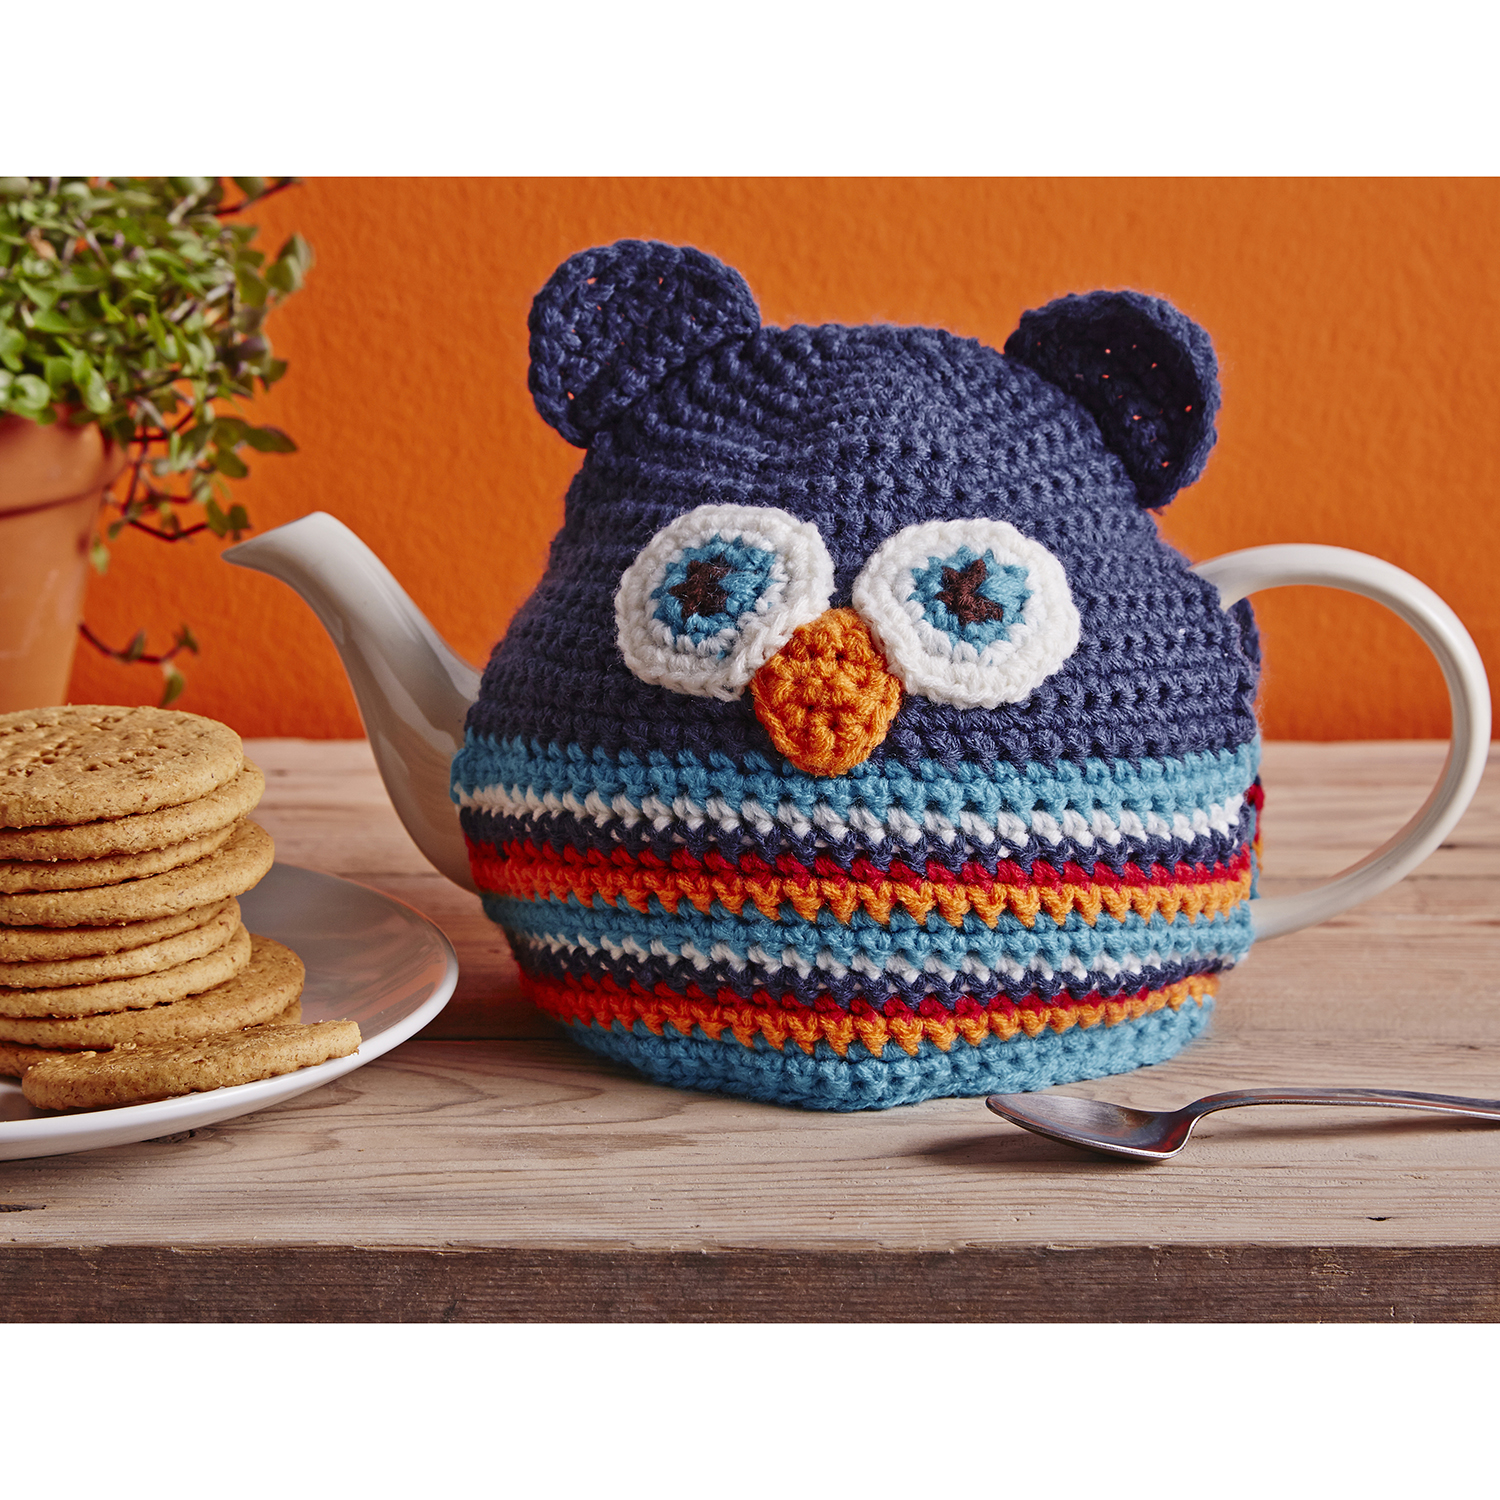 Knitted Tea Cozy - Owl, photo-1